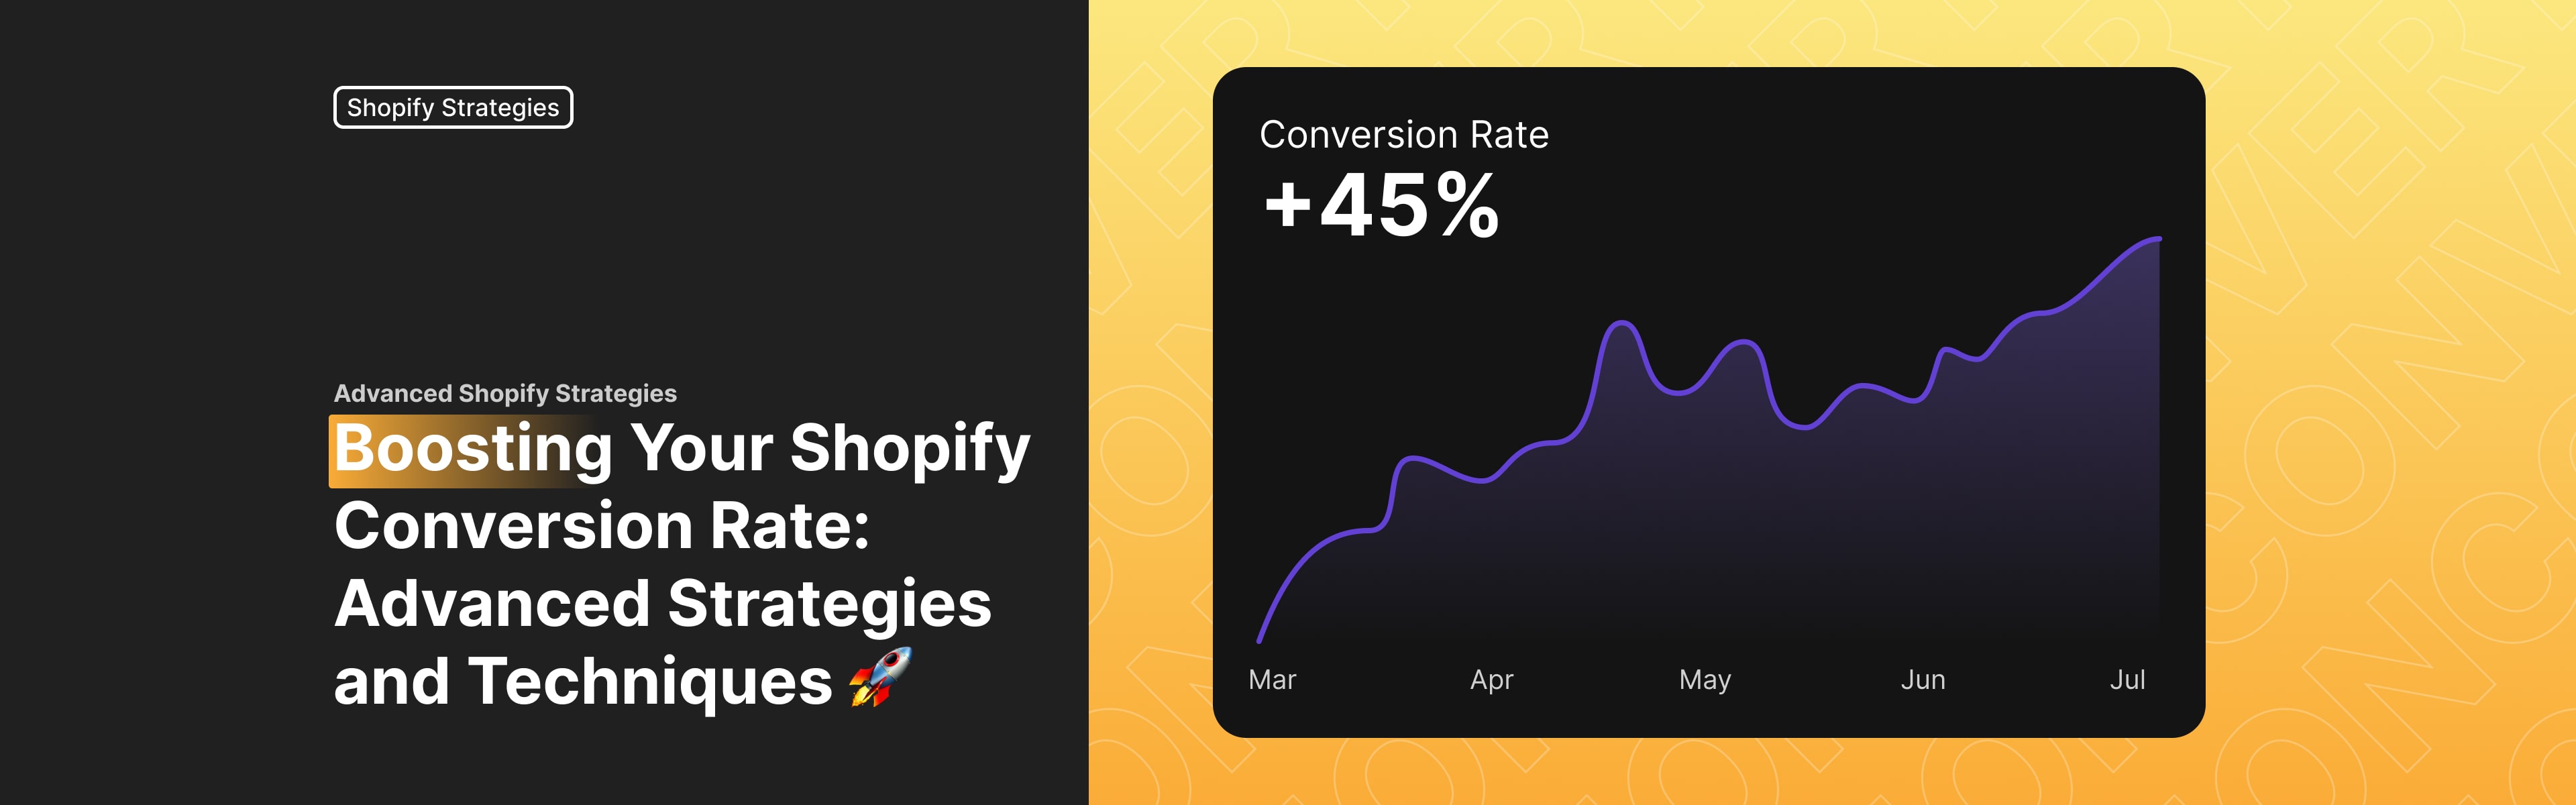 Boosting Your Shopify Conversion Rate: Advanced Strategies and Techniques